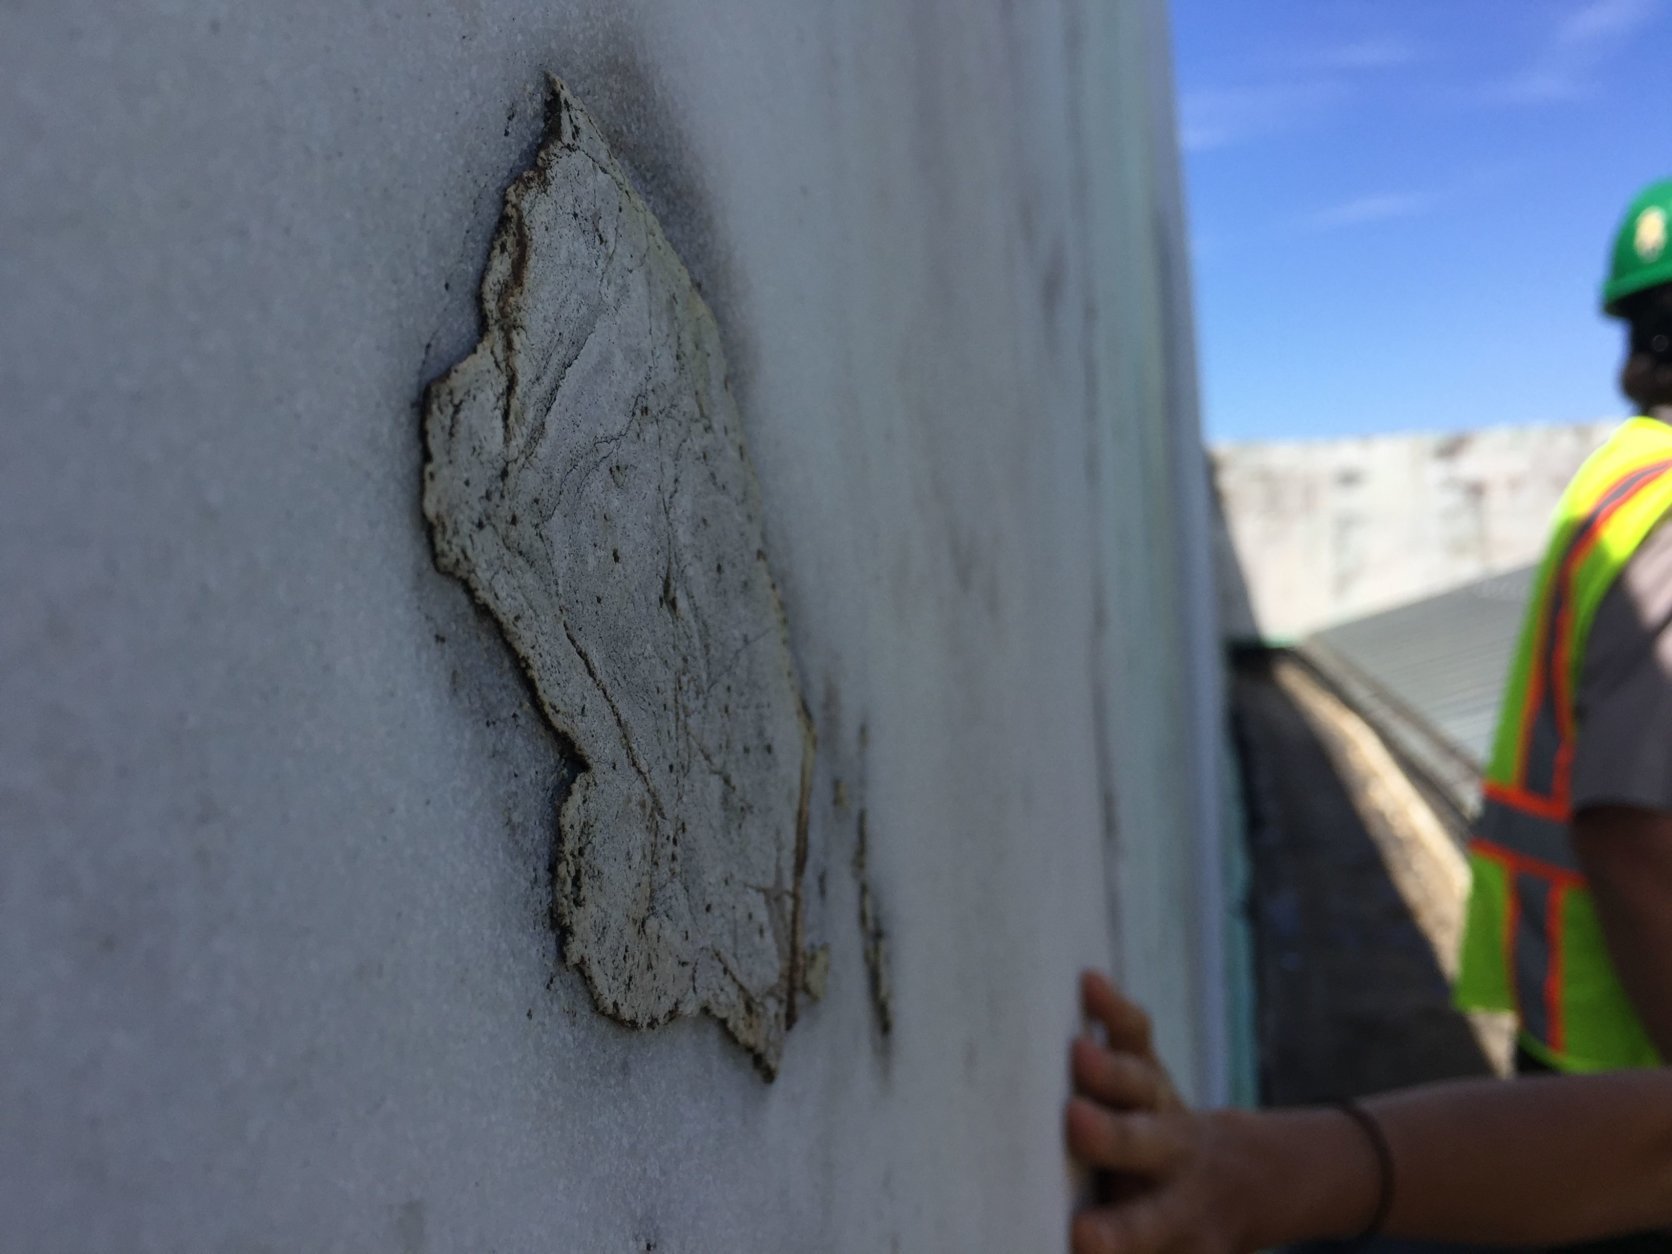 This is not an old repair. It's a naturally occurring inclusion in the marble. (WTOP/Kristi King)